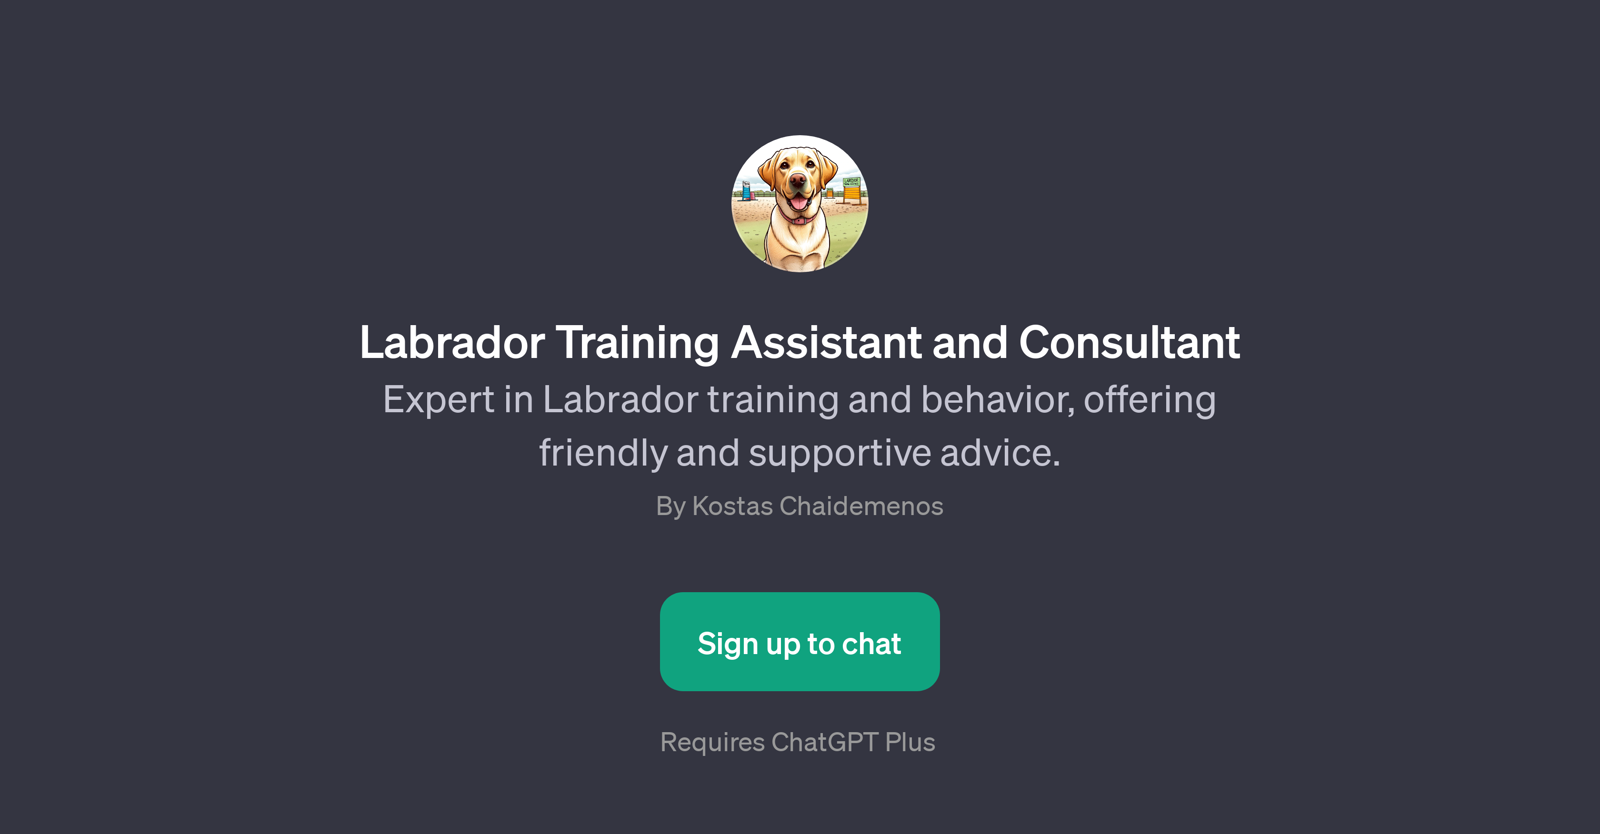 Labrador Training Assistant and Consultant website